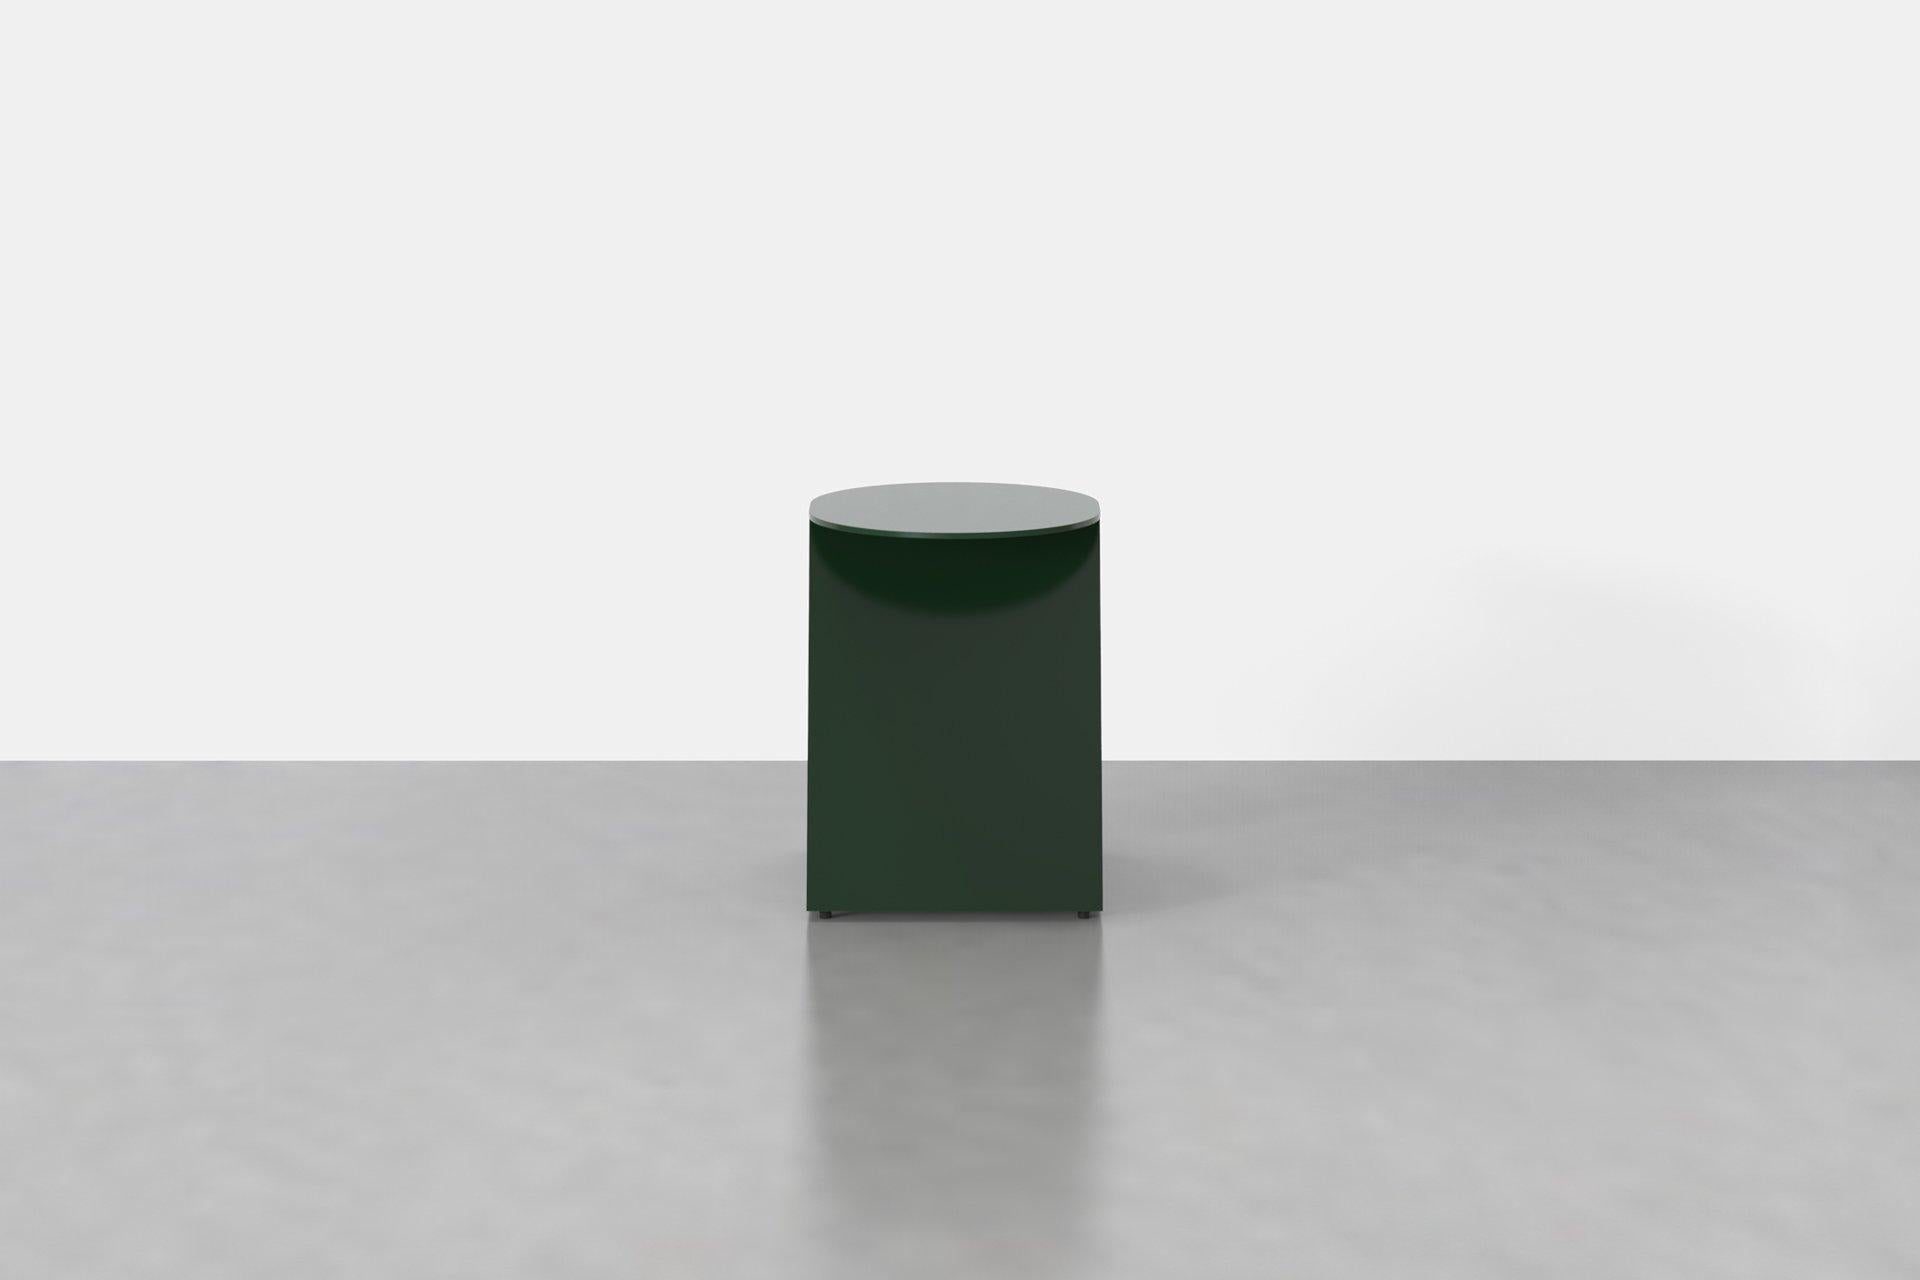 The Tack stool is more than it seems--use it as an end table, side table, pedestal, or as a sculptural feature for that new plant you brought home. The Tack stool is made from powder-coated aluminum in a palette of vibrant tones.

Available in